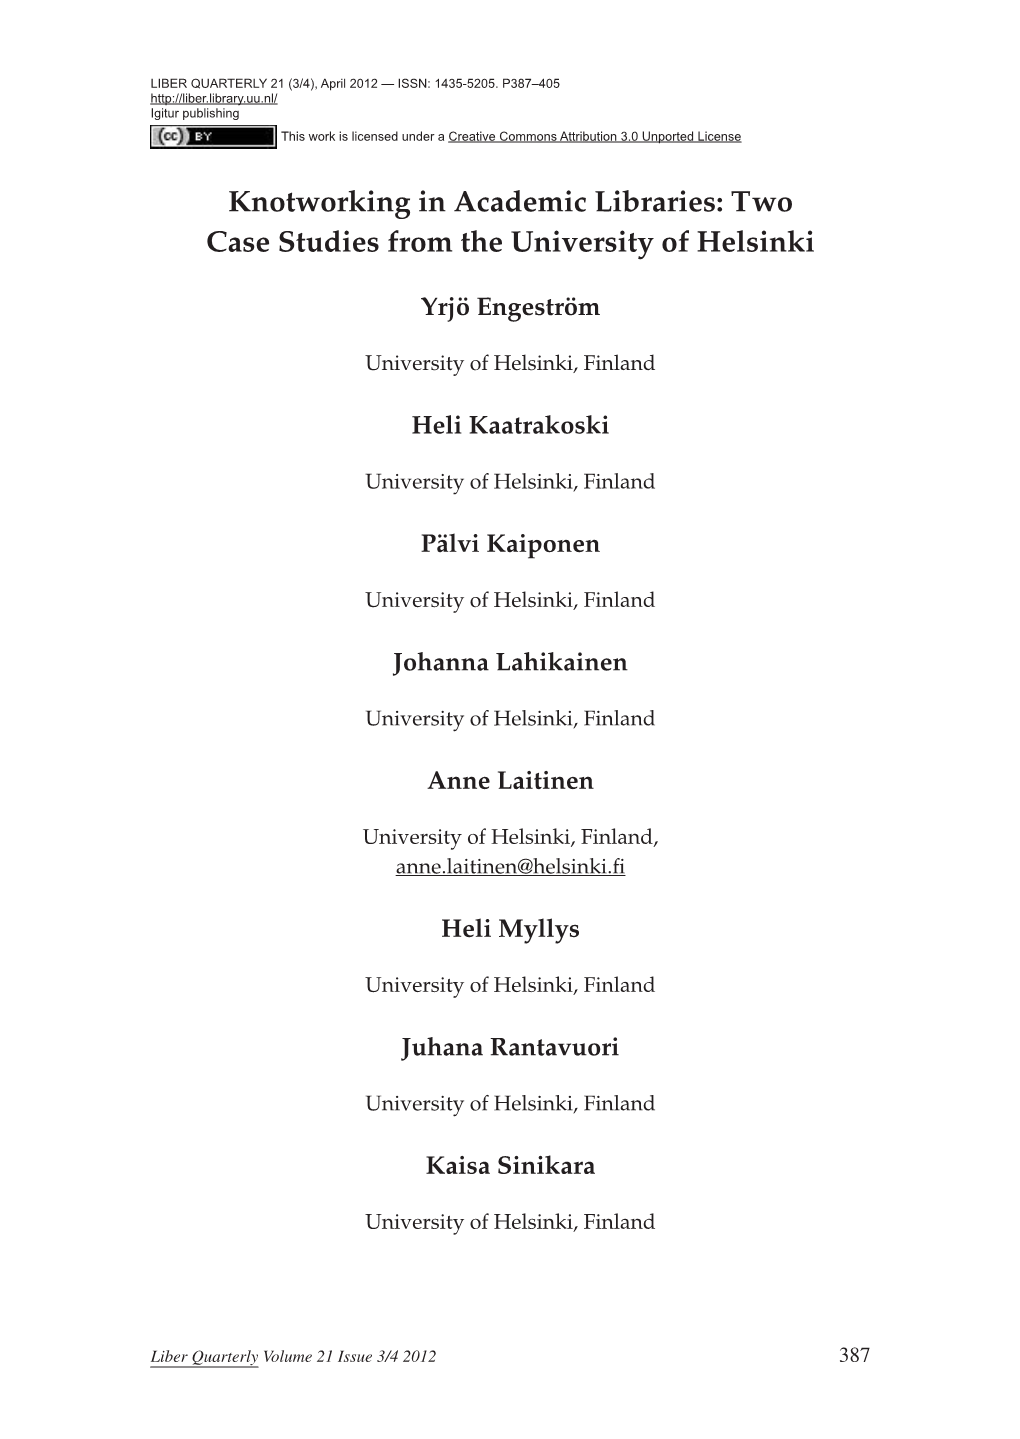 Knotworking in Academic Libraries: Two Case Studies from the University of Helsinki